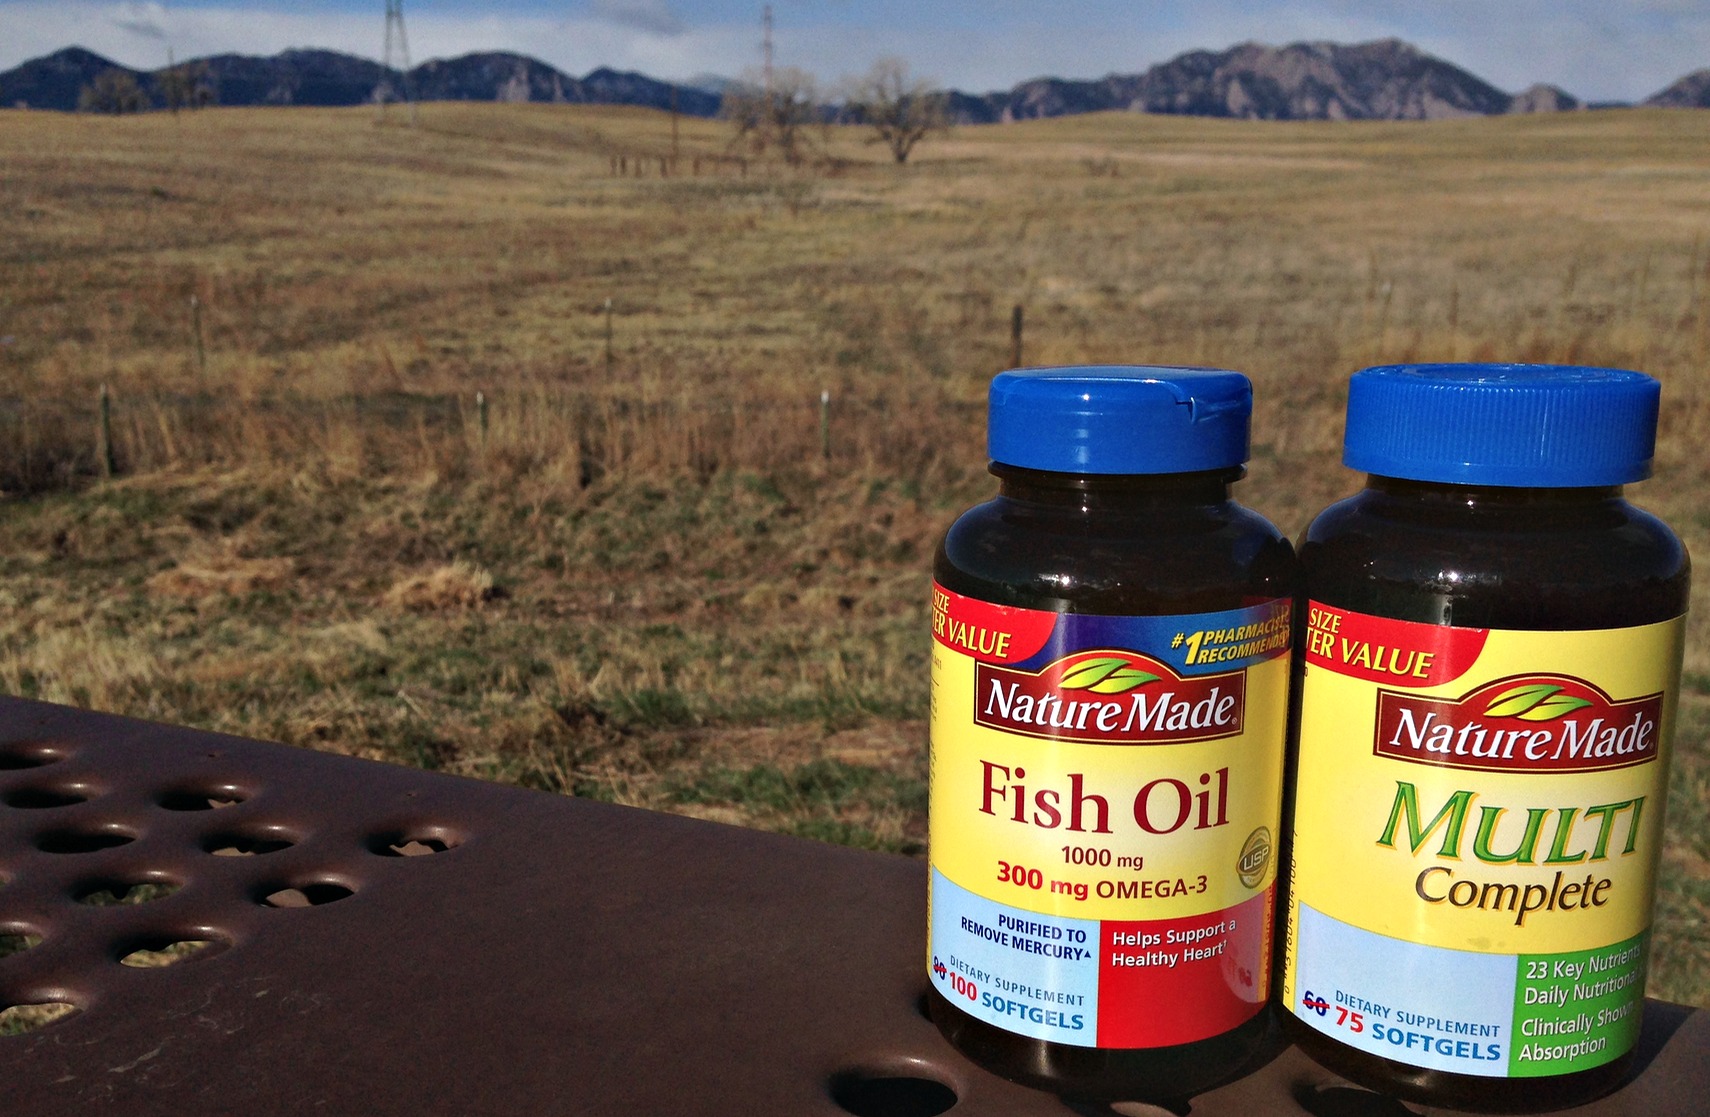 Nature Made Fish Oil Vitamins - Why Walking Daily is Good For You